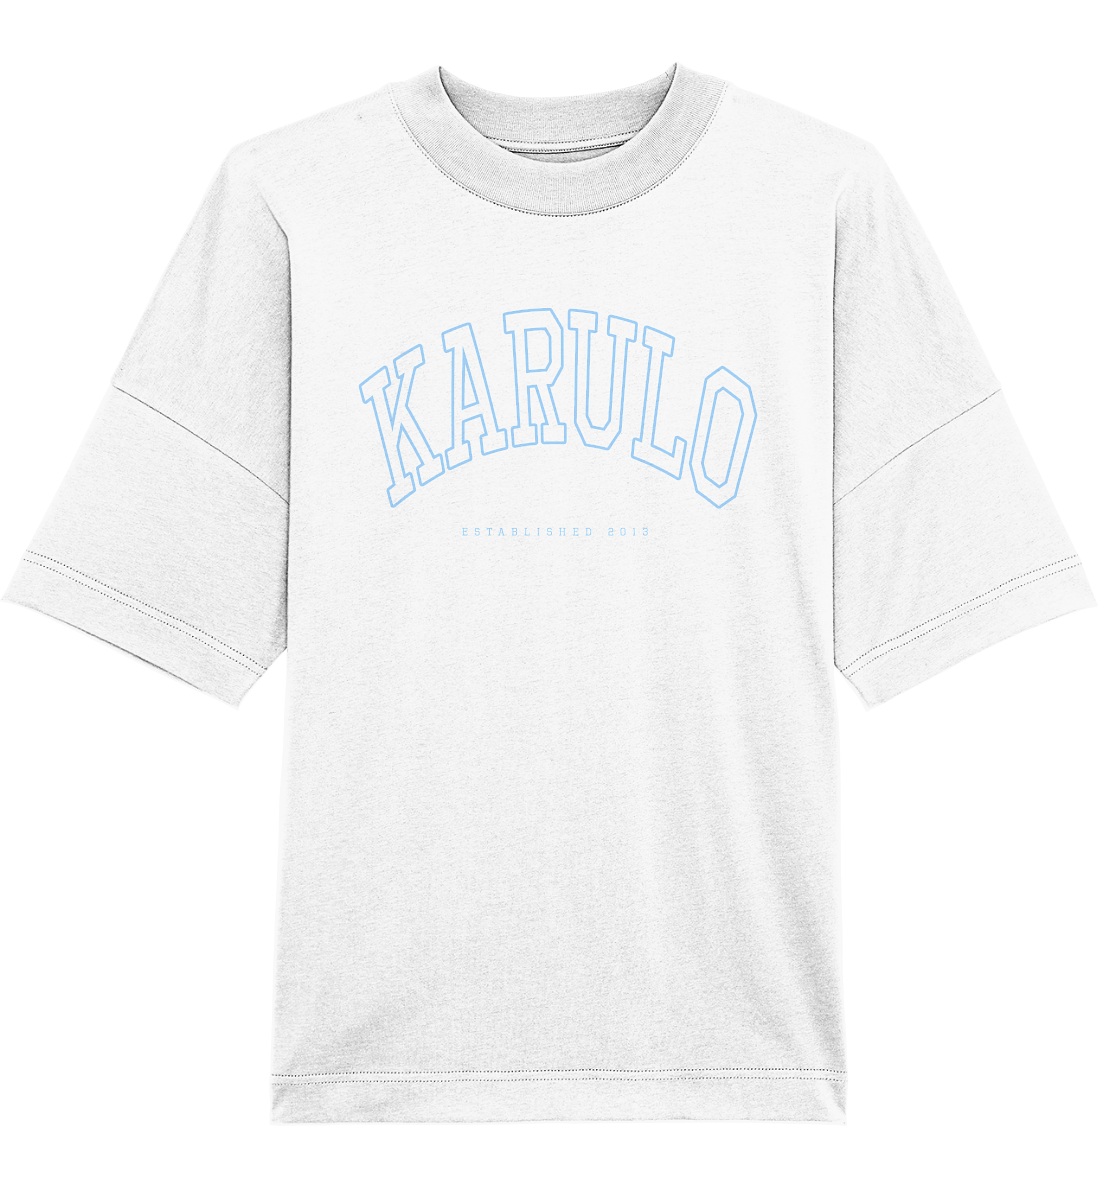 Karulo in College (OVERSIZED SHIRT)